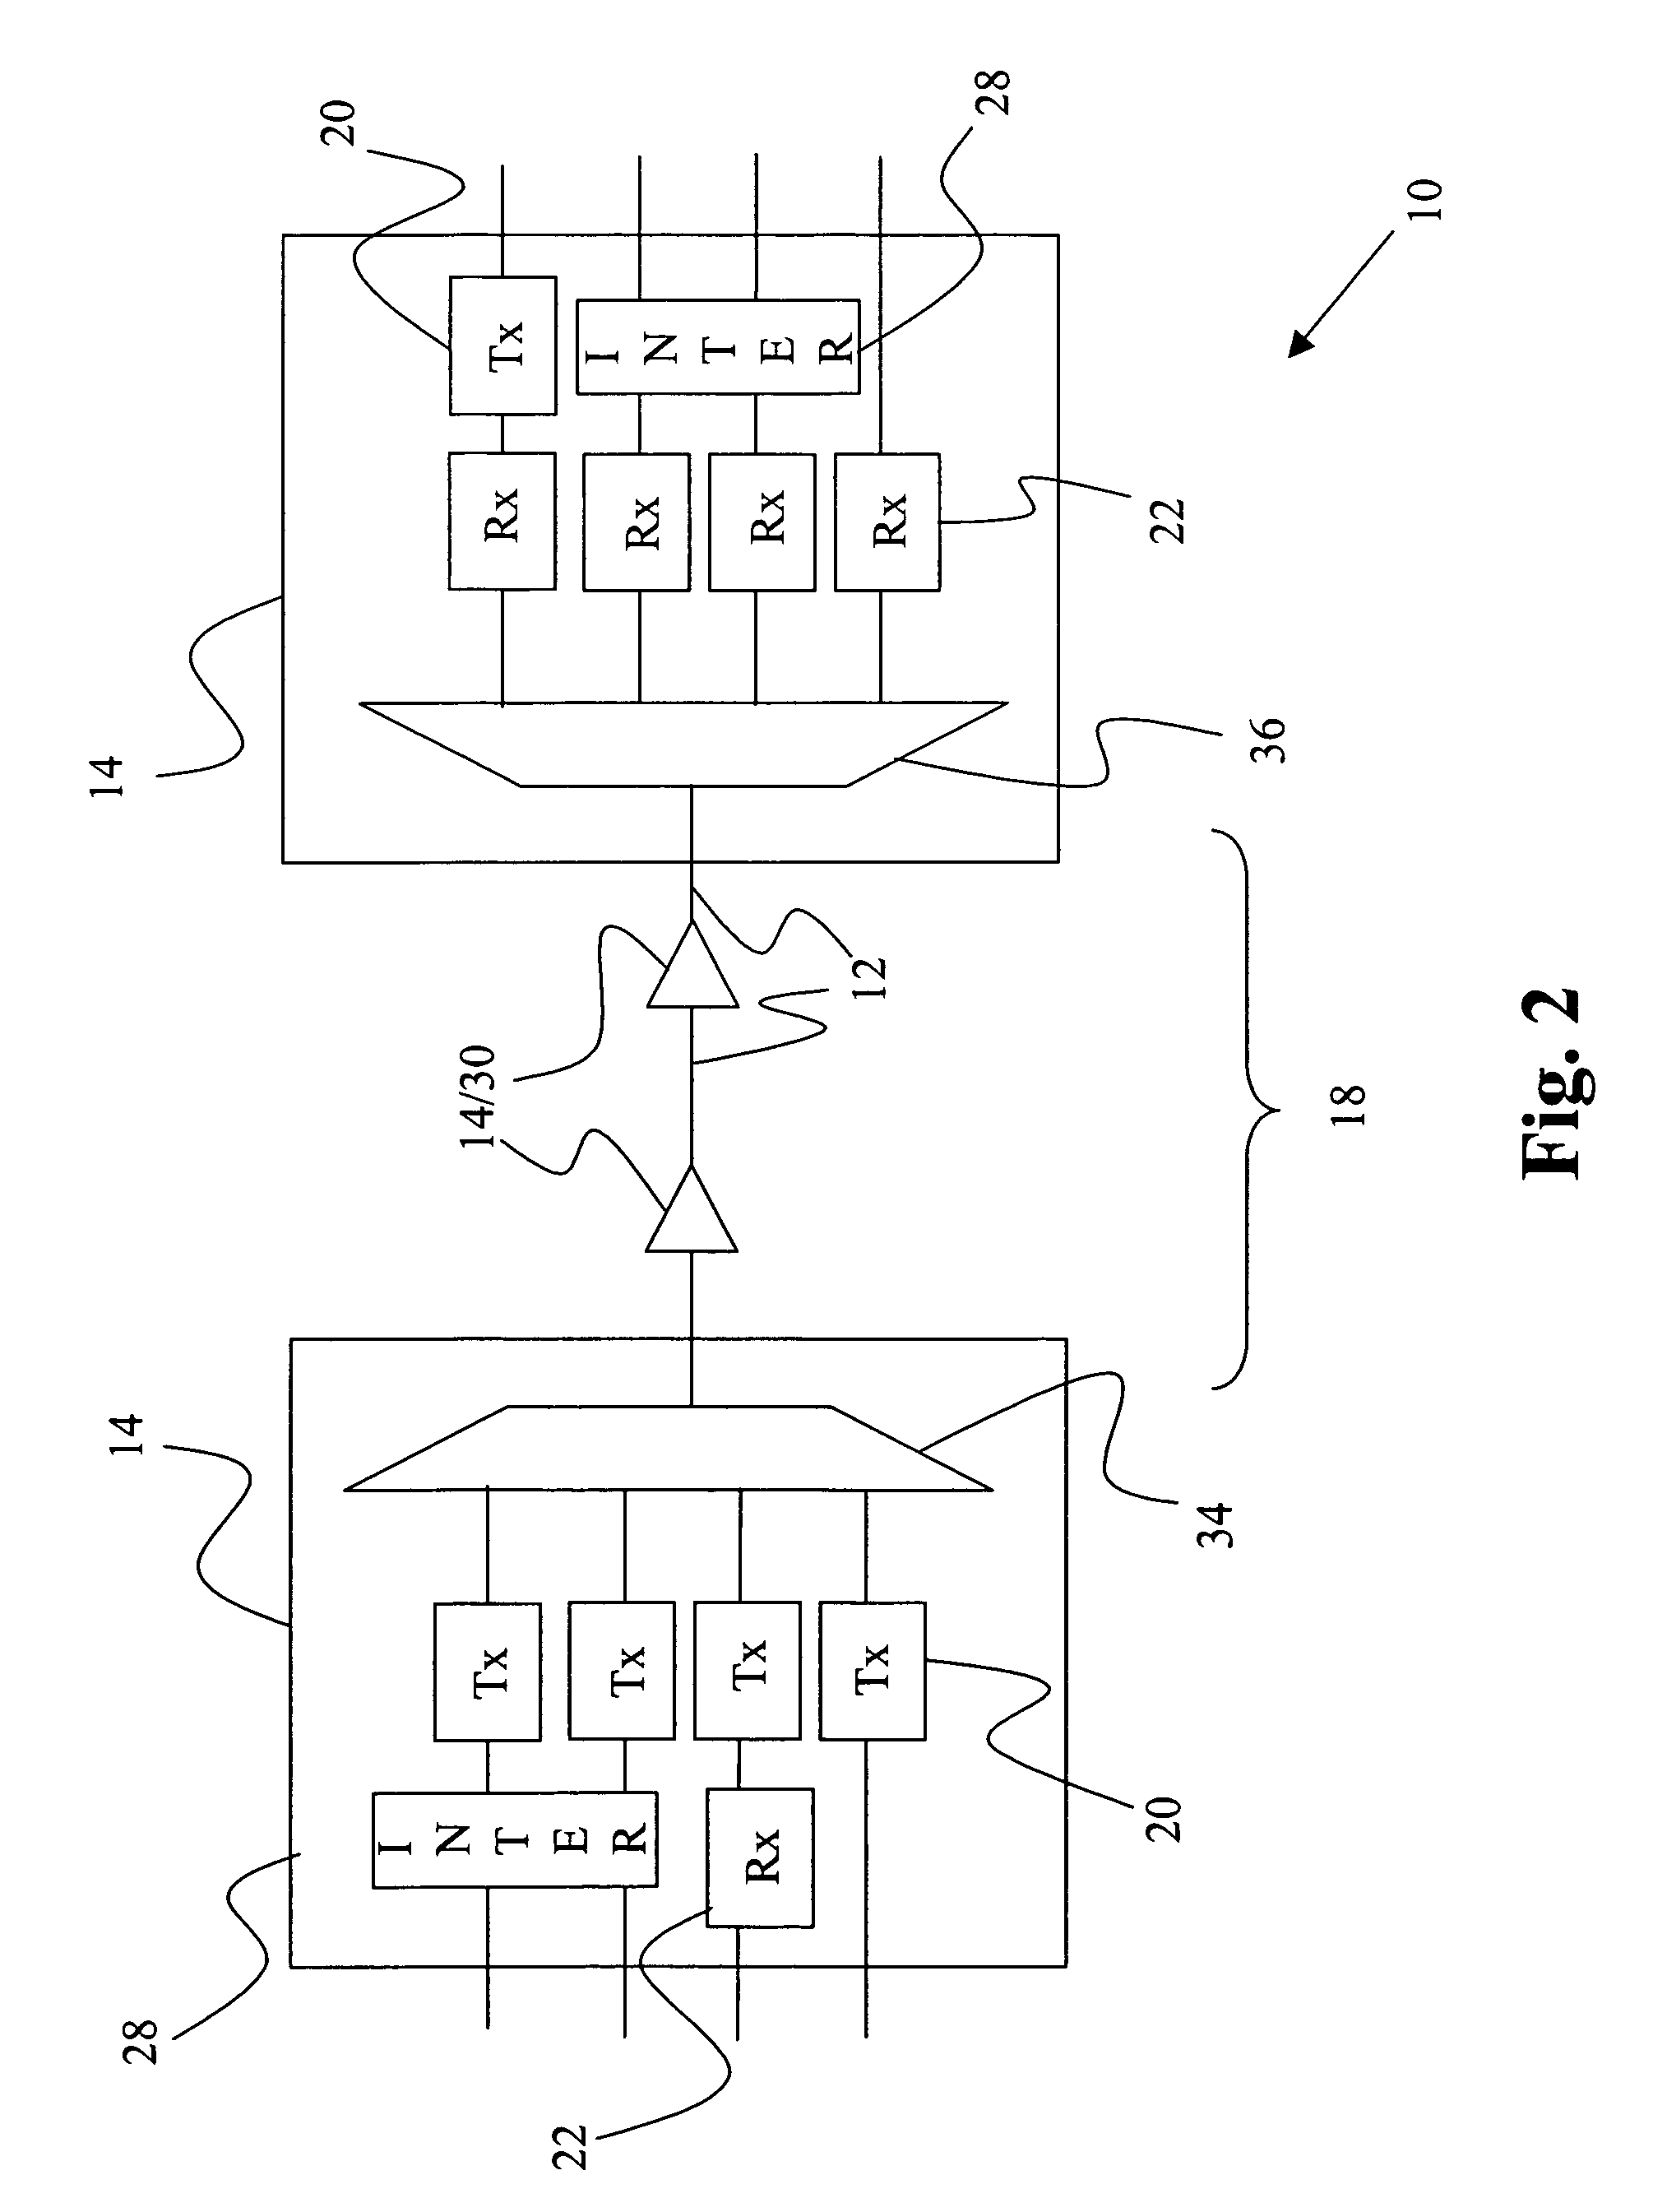 Optical communications systems, devices, and methods